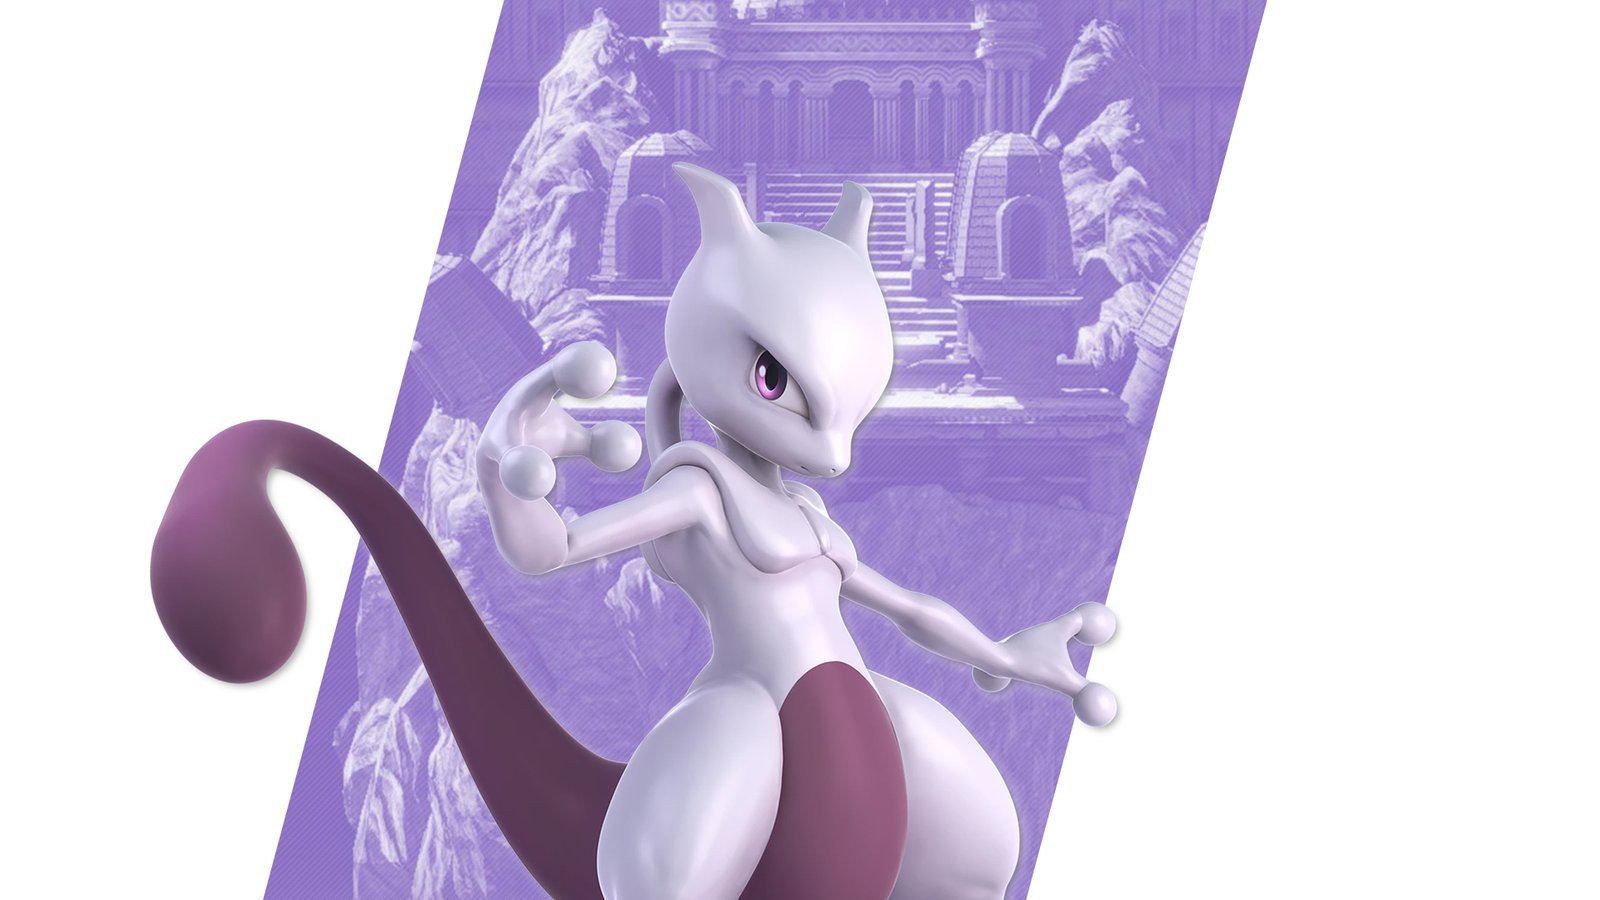 Super Smash Bros Ultimate Mewtwo Wallpaper with Monocle